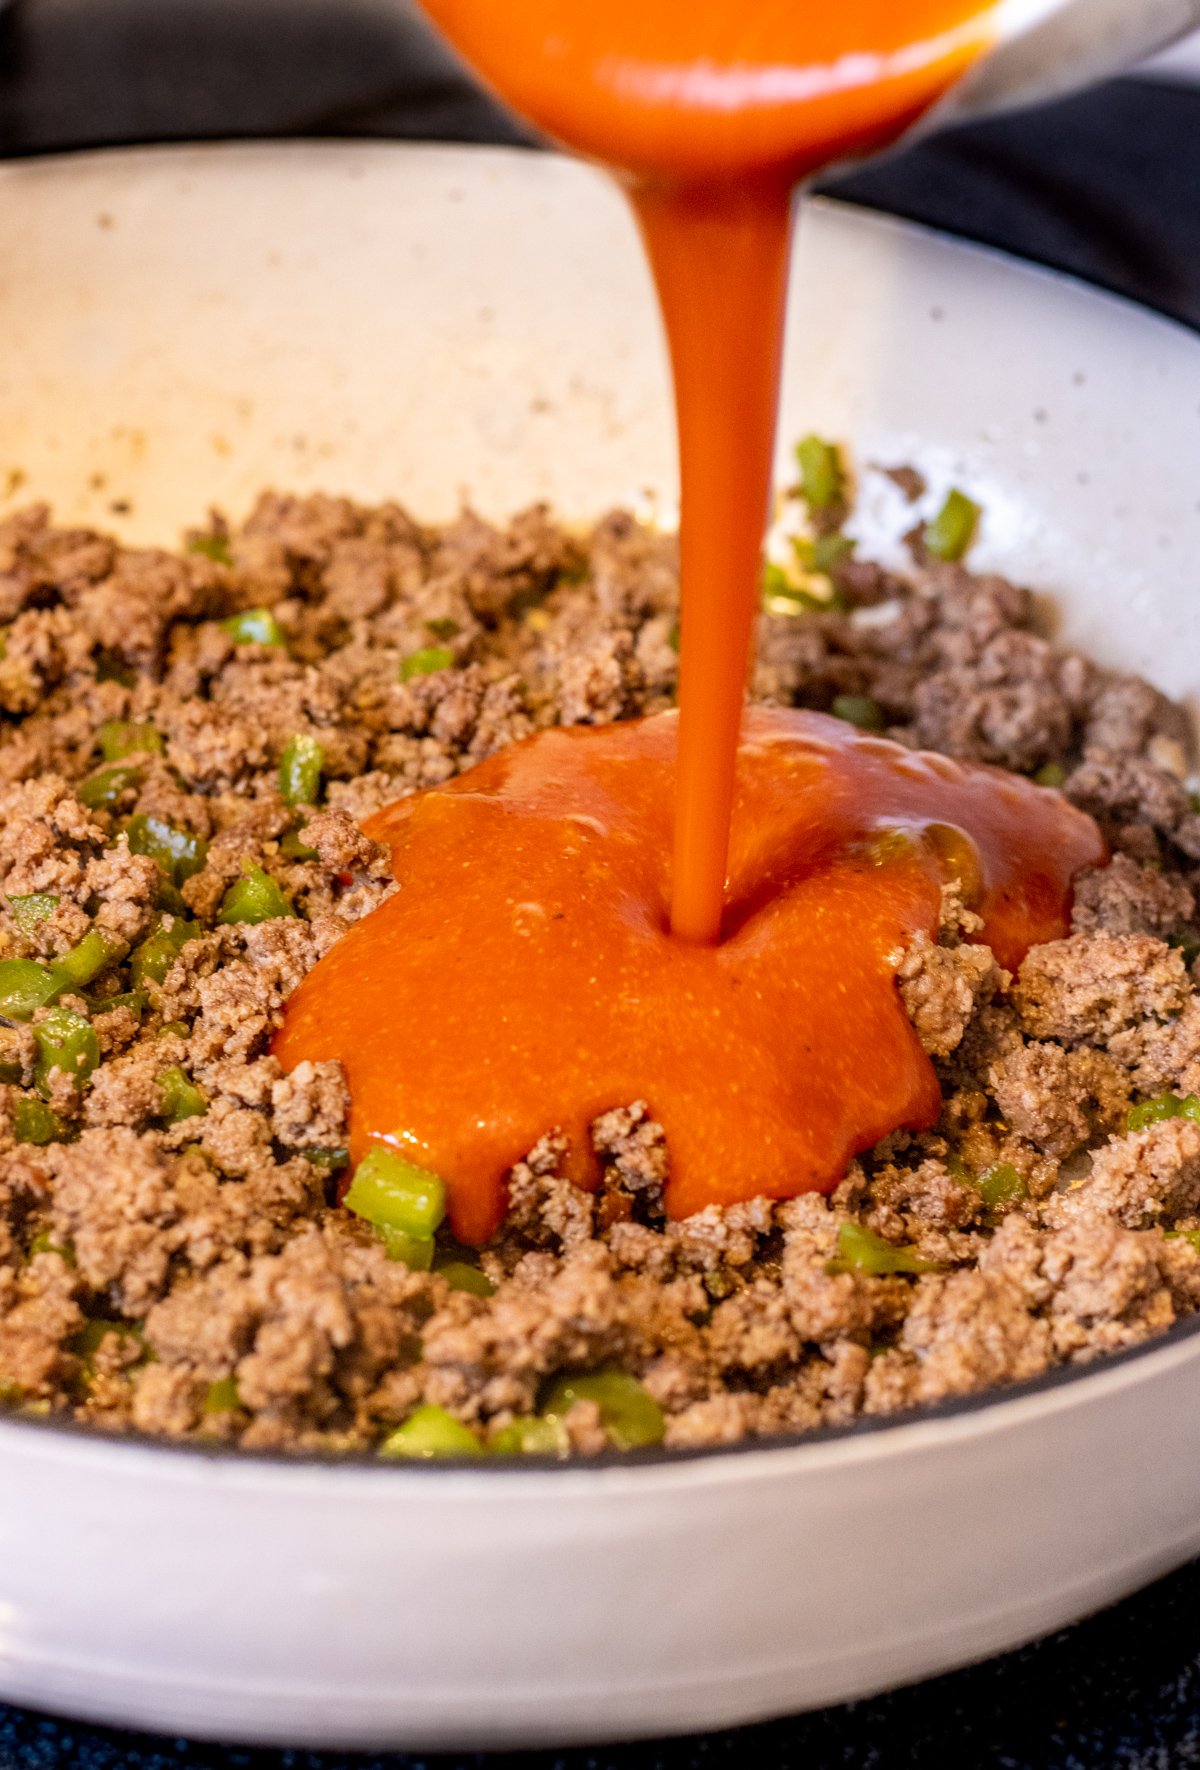 Sauce being poured into cooked ground beef.